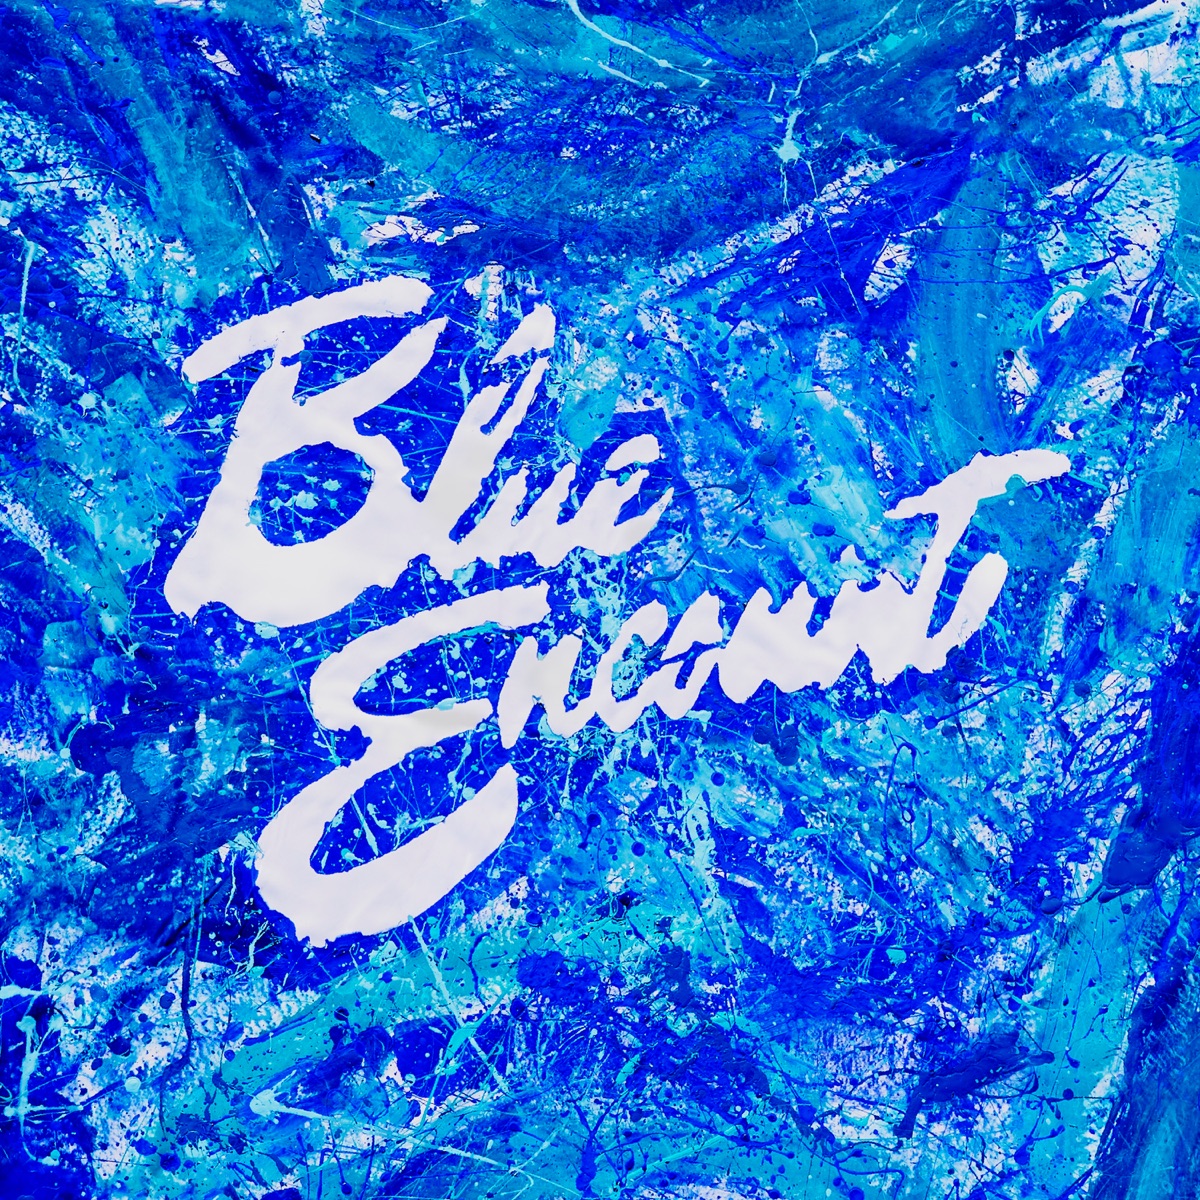 Cover art for『BLUE ENCOUNT - Ao』from the release『Ao』